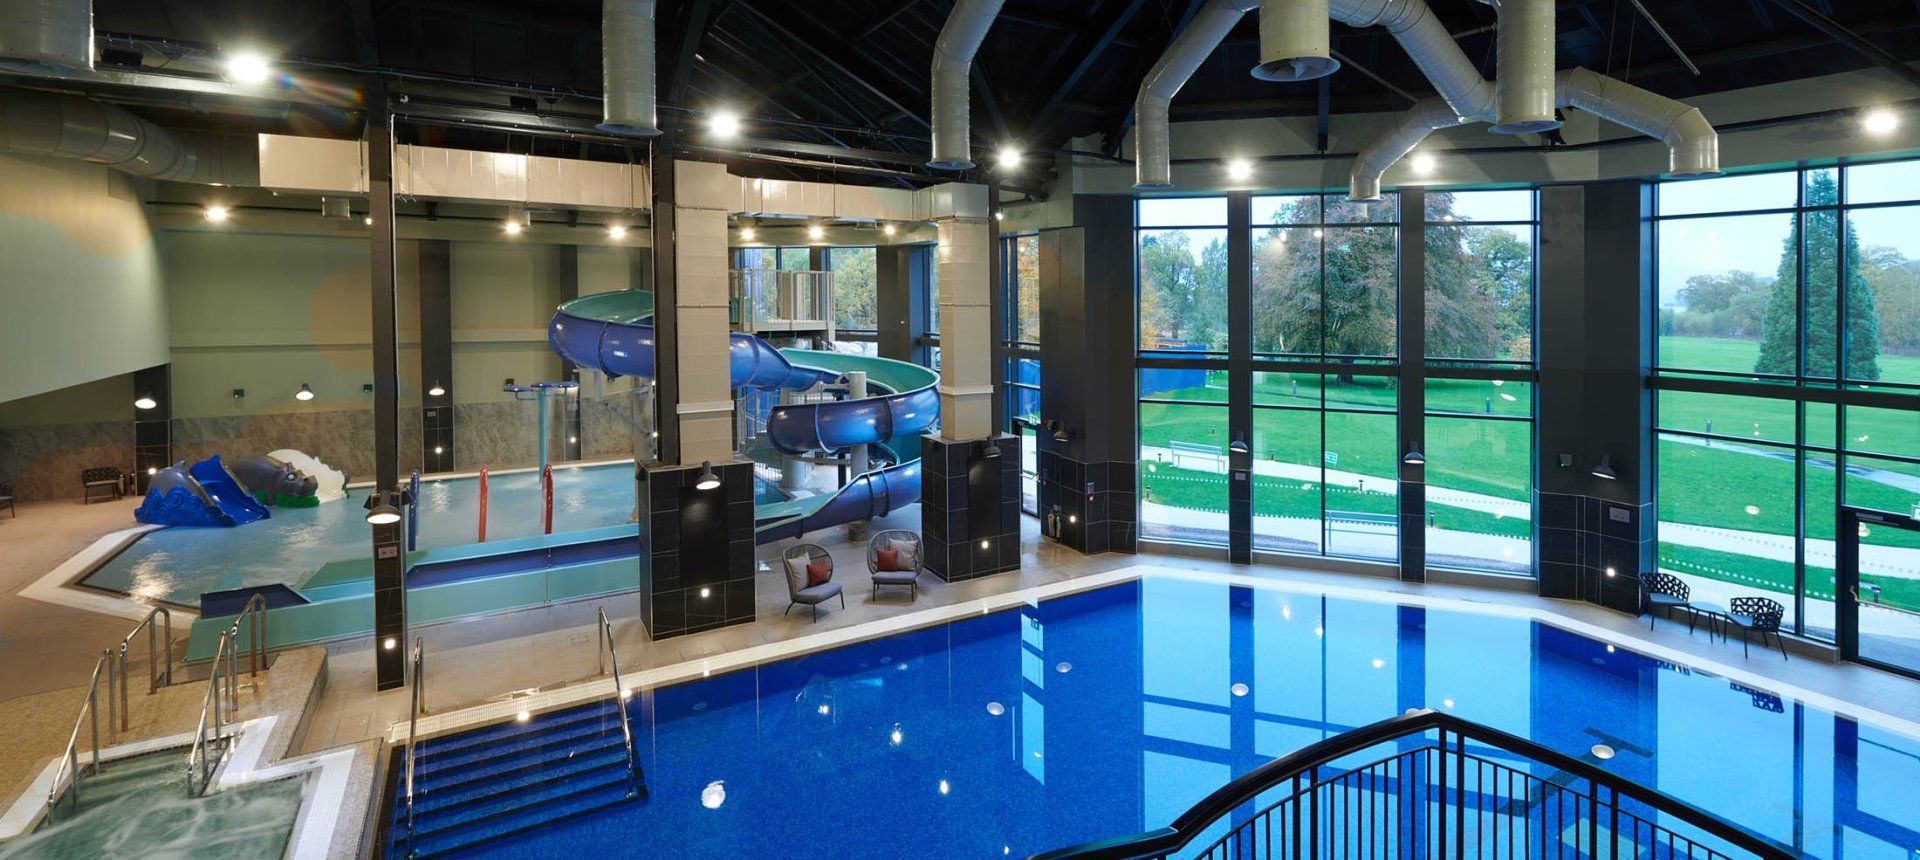 over head view of the indoor pool with large windows showing the trees out side